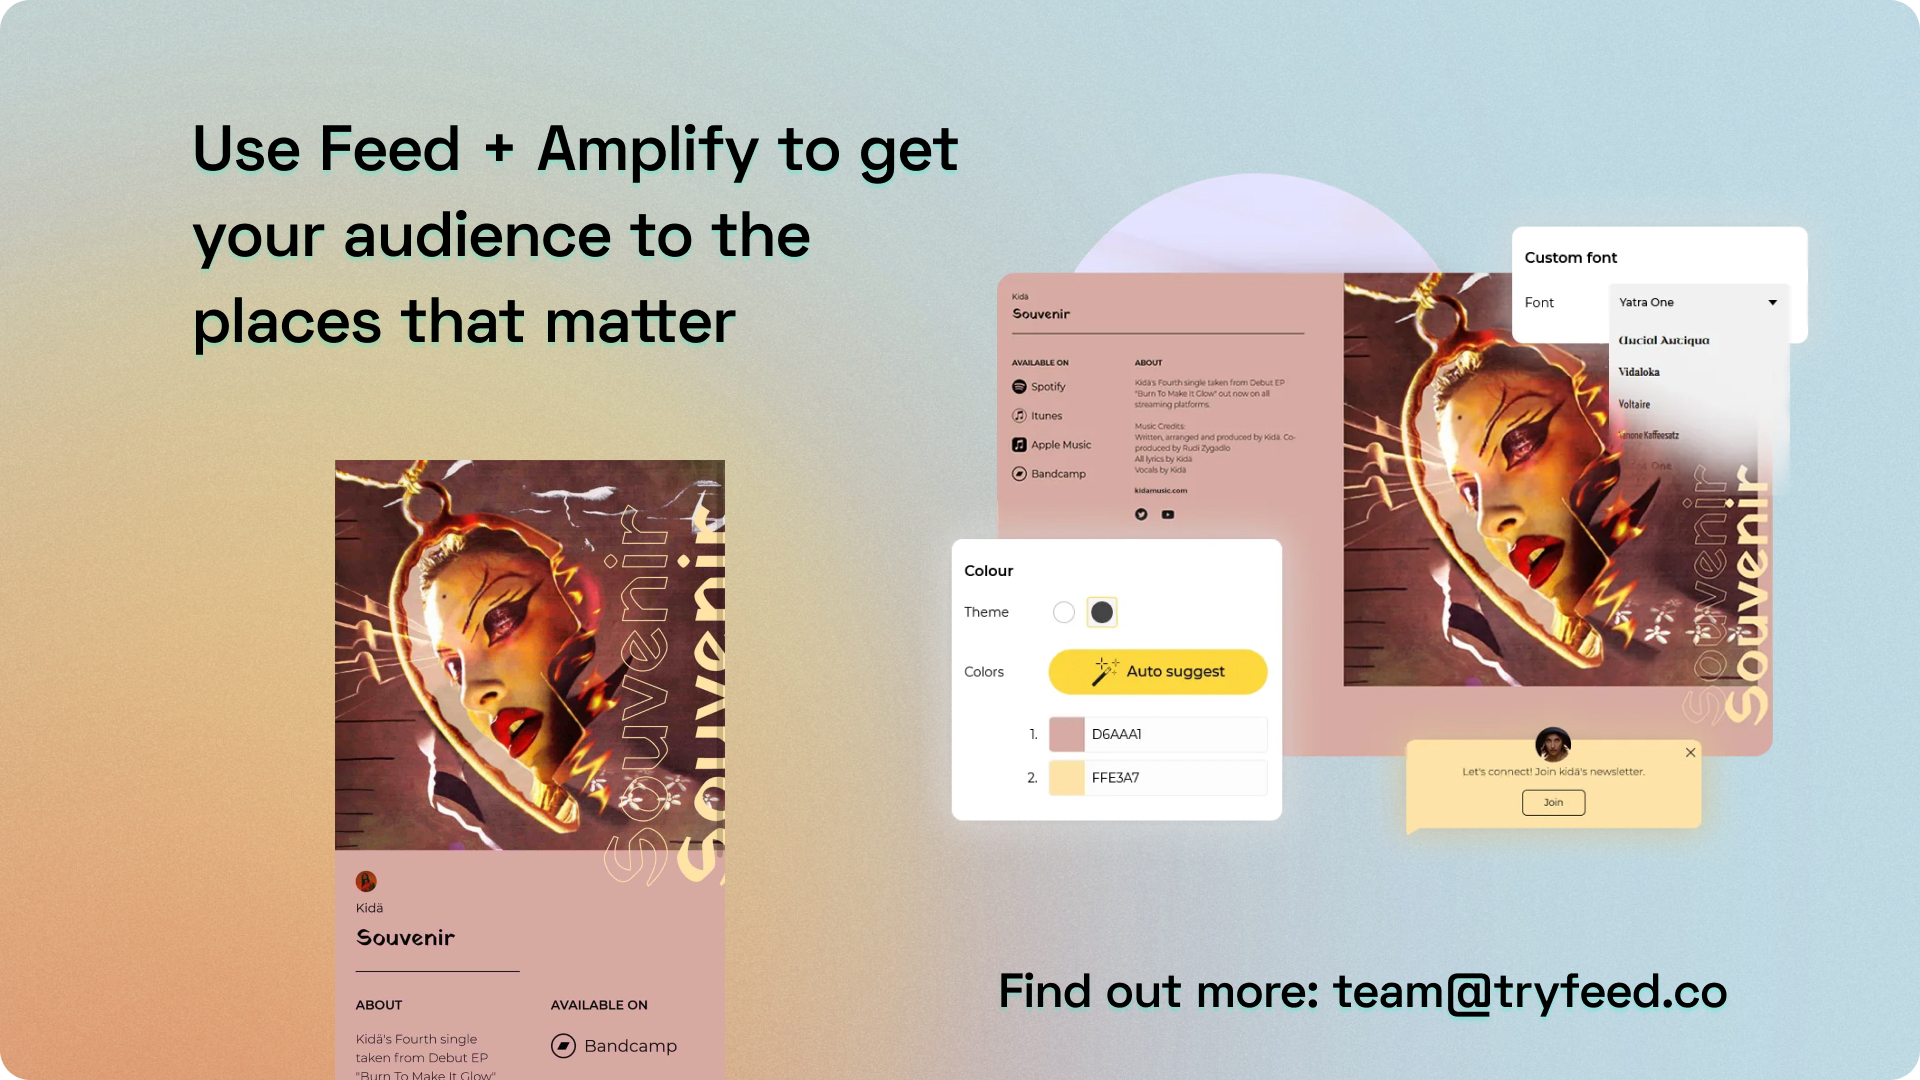 Used Feed + Amplify to get your audience to the places that matter